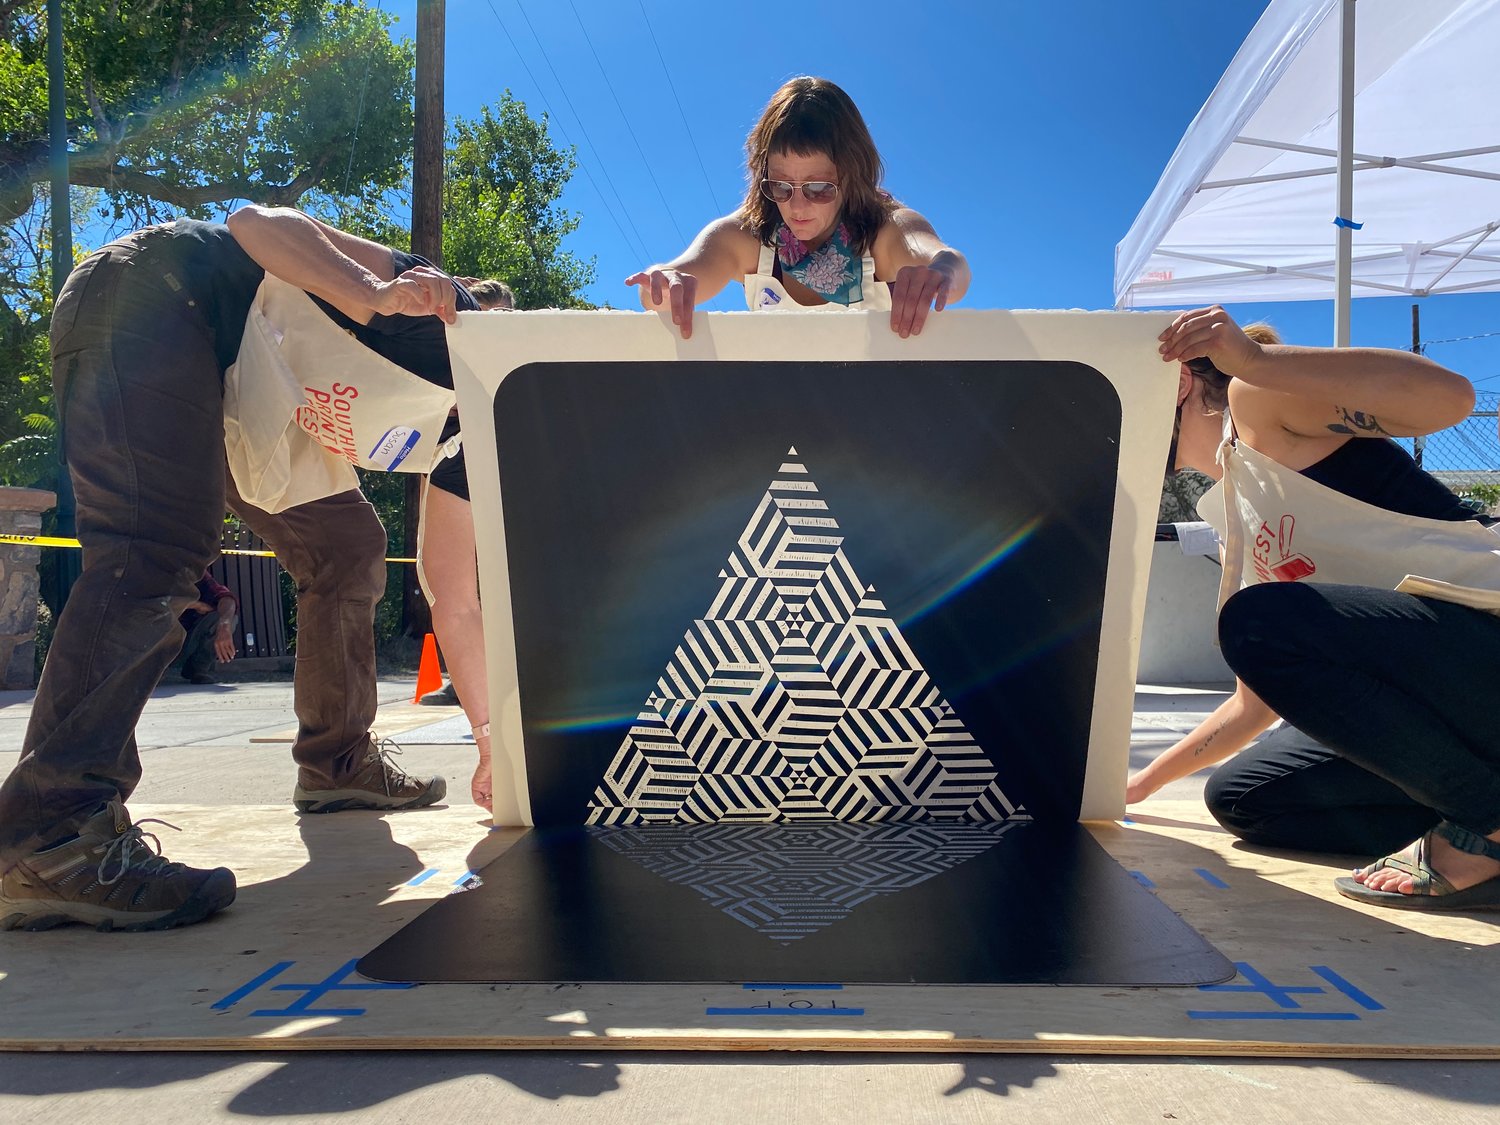 Alyssa Bell, the volunteer in the middle of the photo, and other volunteers are printing a piece by Daniel Garver, from Silver City, during the Southwest Print Fiesta steamroller printing event during the 2021 event.